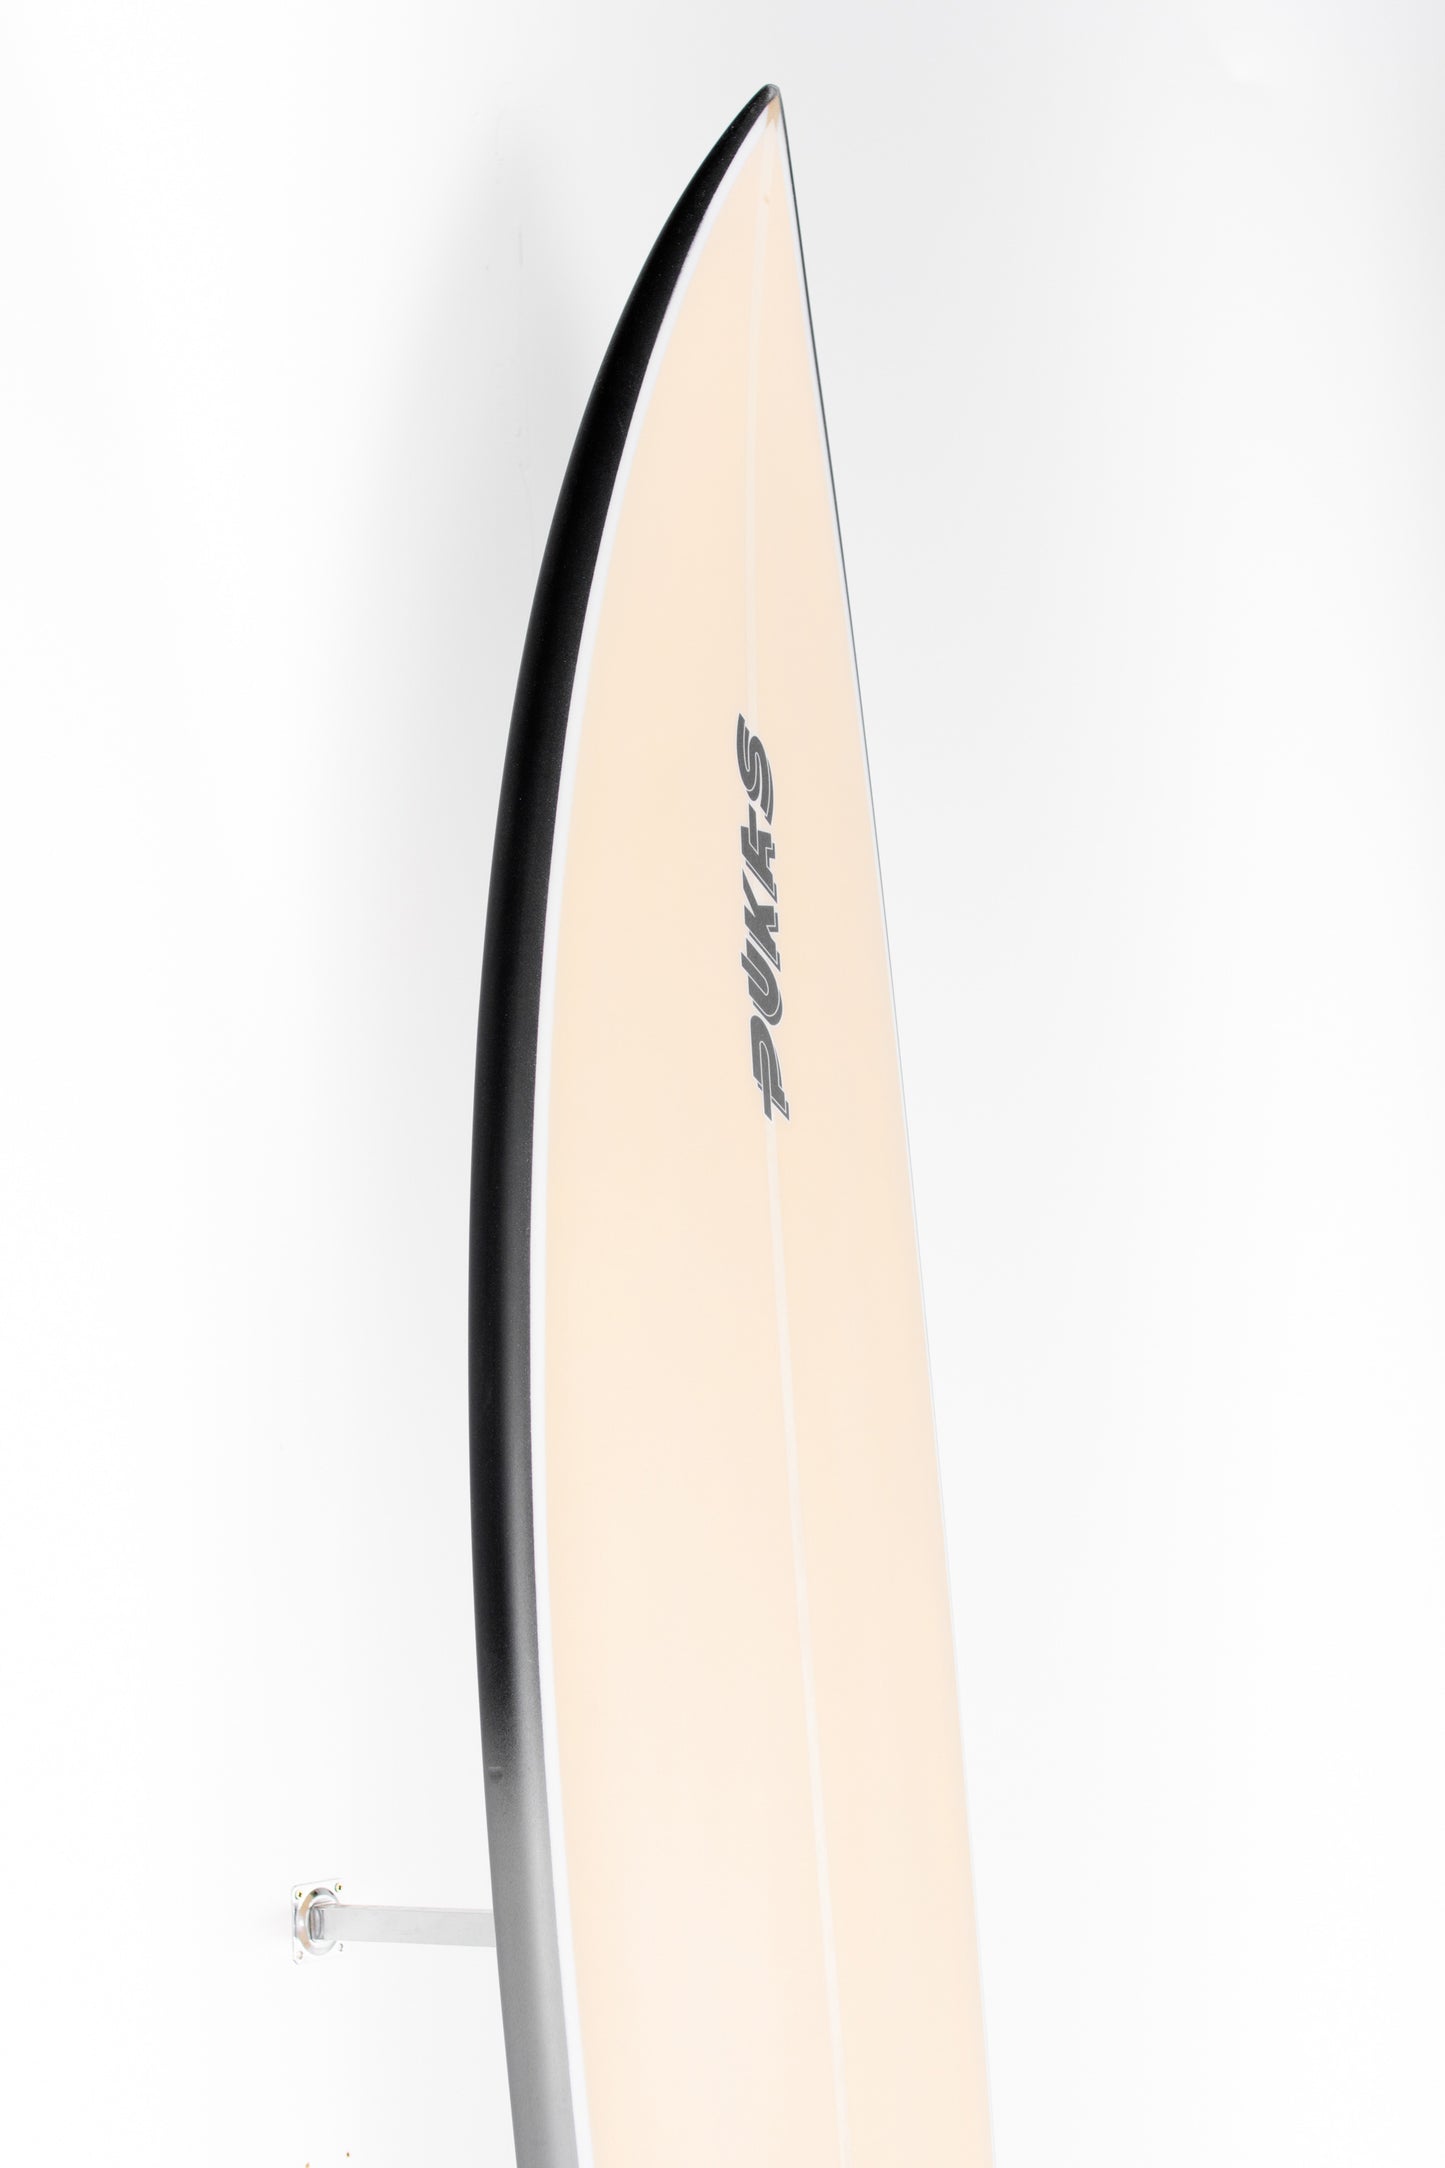 
                  
                    Pukas Surf Shop - Pukas Surfboard - TWIG CHARGER by Axel Lorentz - 8´6” x 20 5/8 x 3 3/8 - 60L  AX06031
                  
                